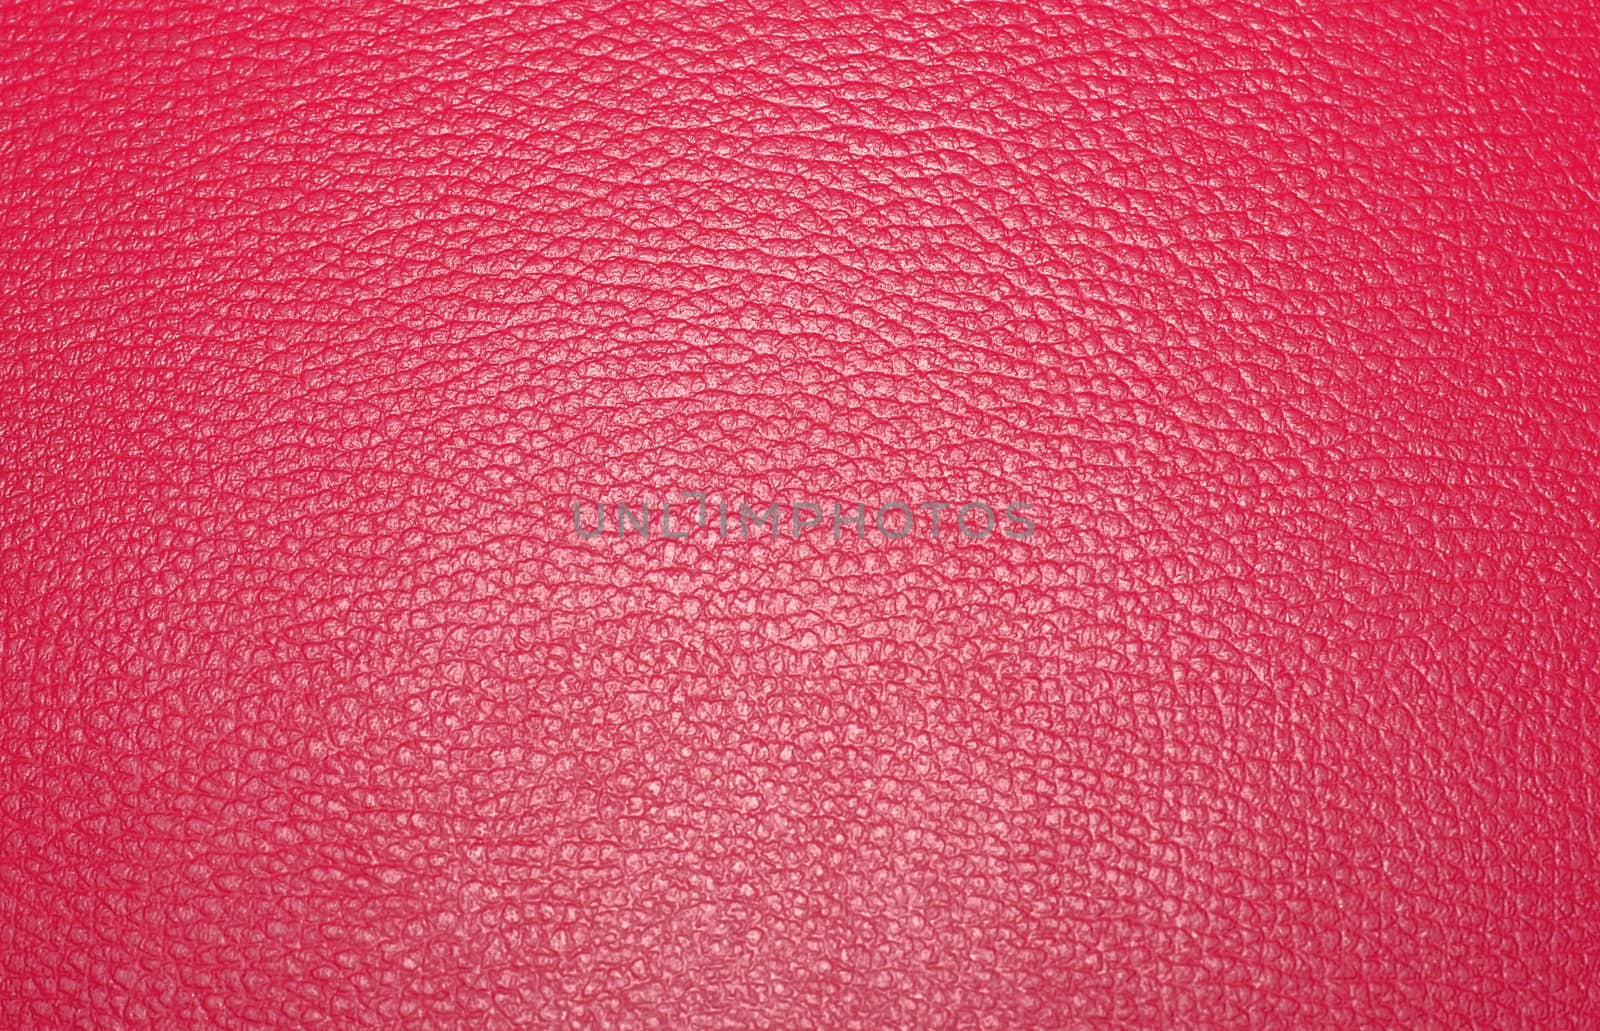 Texture colored leatherette red, for design and upholstery for decoration and fashion, for the background and tukstur